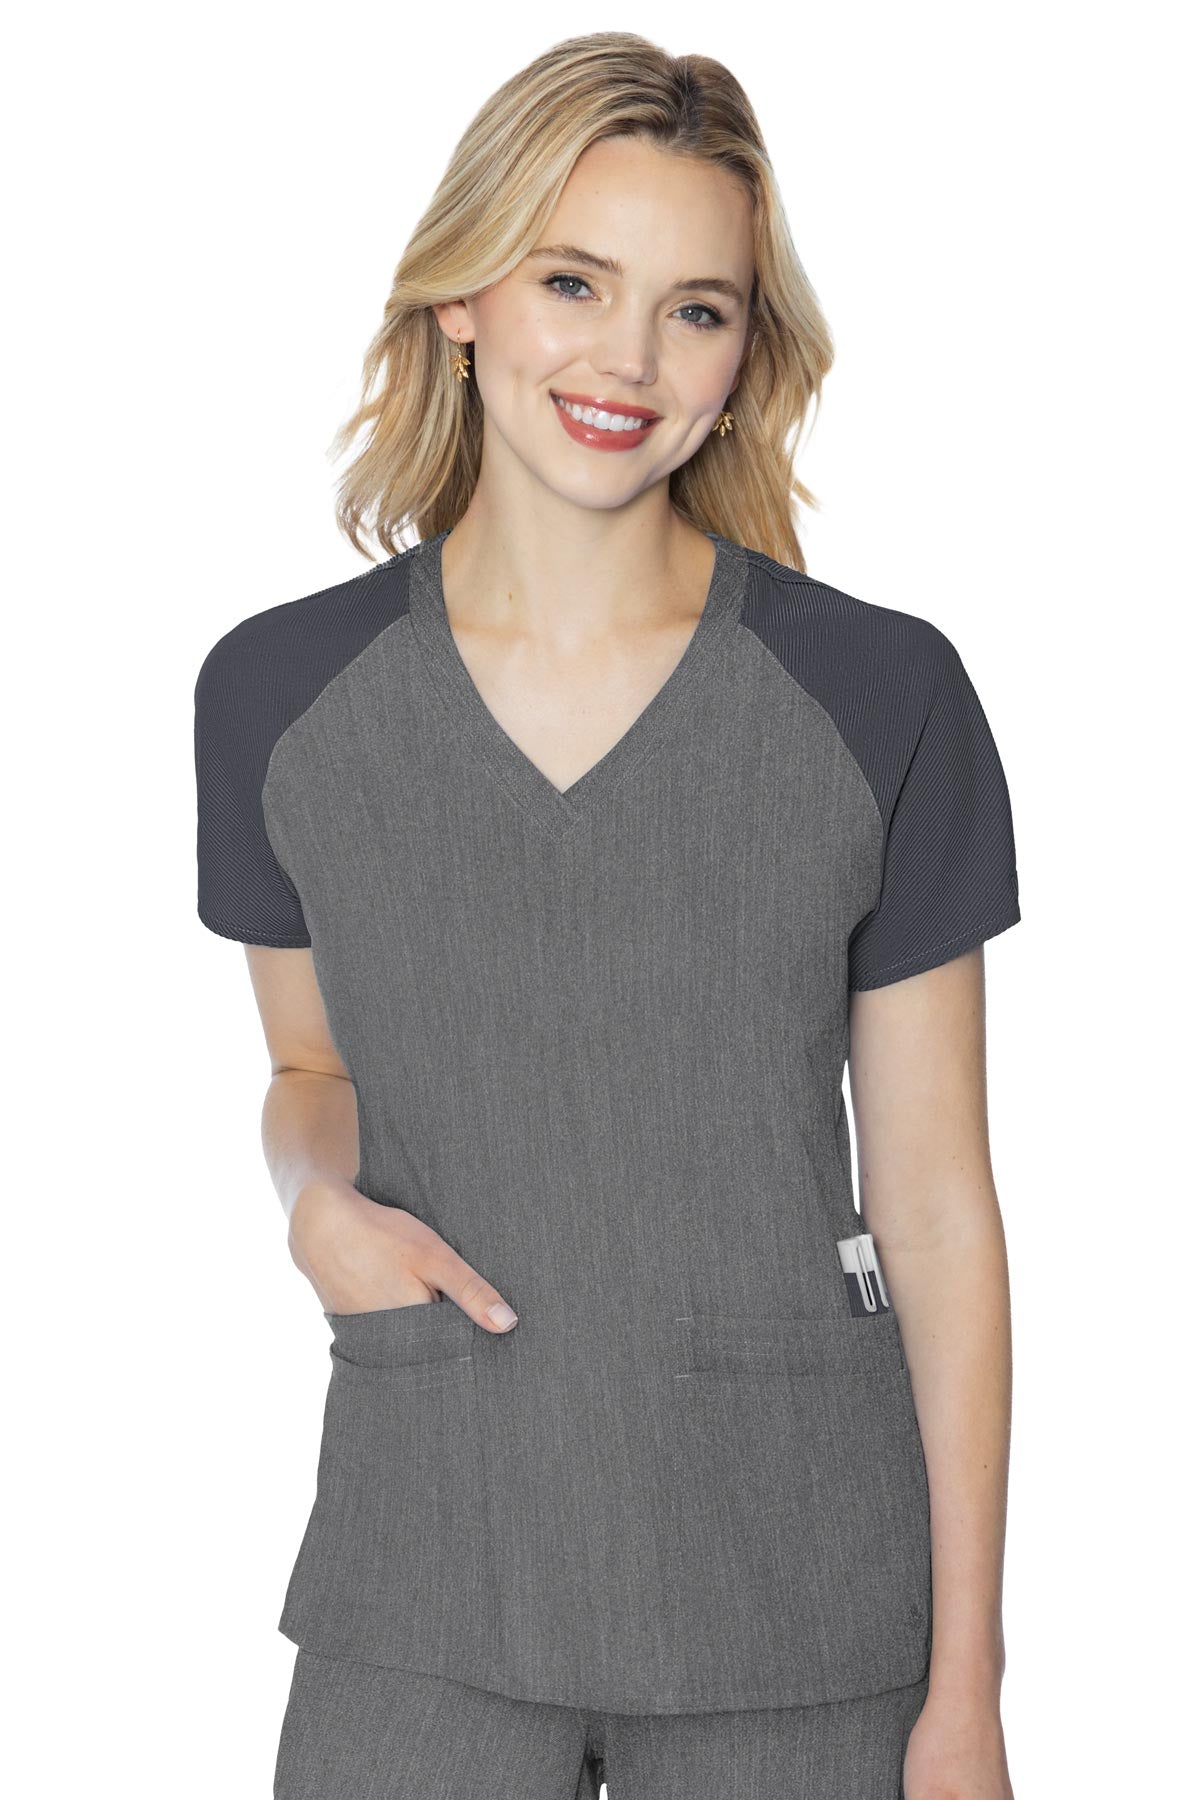 Med Couture Scrub Top Touch Raglan Sleeve in slate at Parker's Clothing and Shoes.